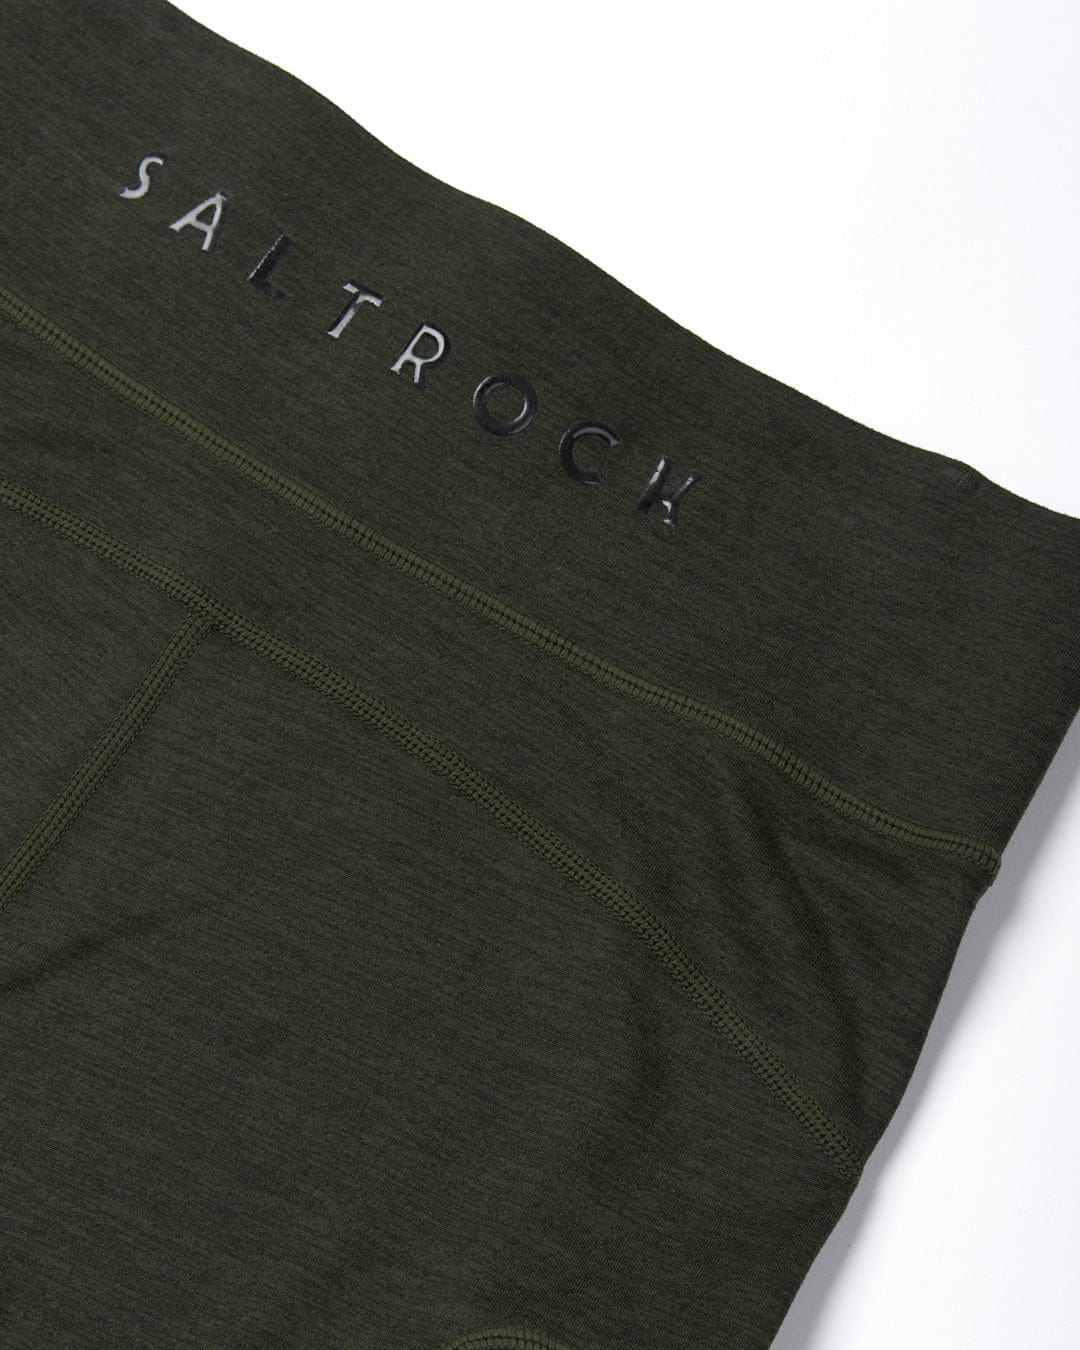 Close-up view of a high-quality stretch dark green Saltrock Trek Womens Active Leggings showing the brand name embroidered in black on the waistband.